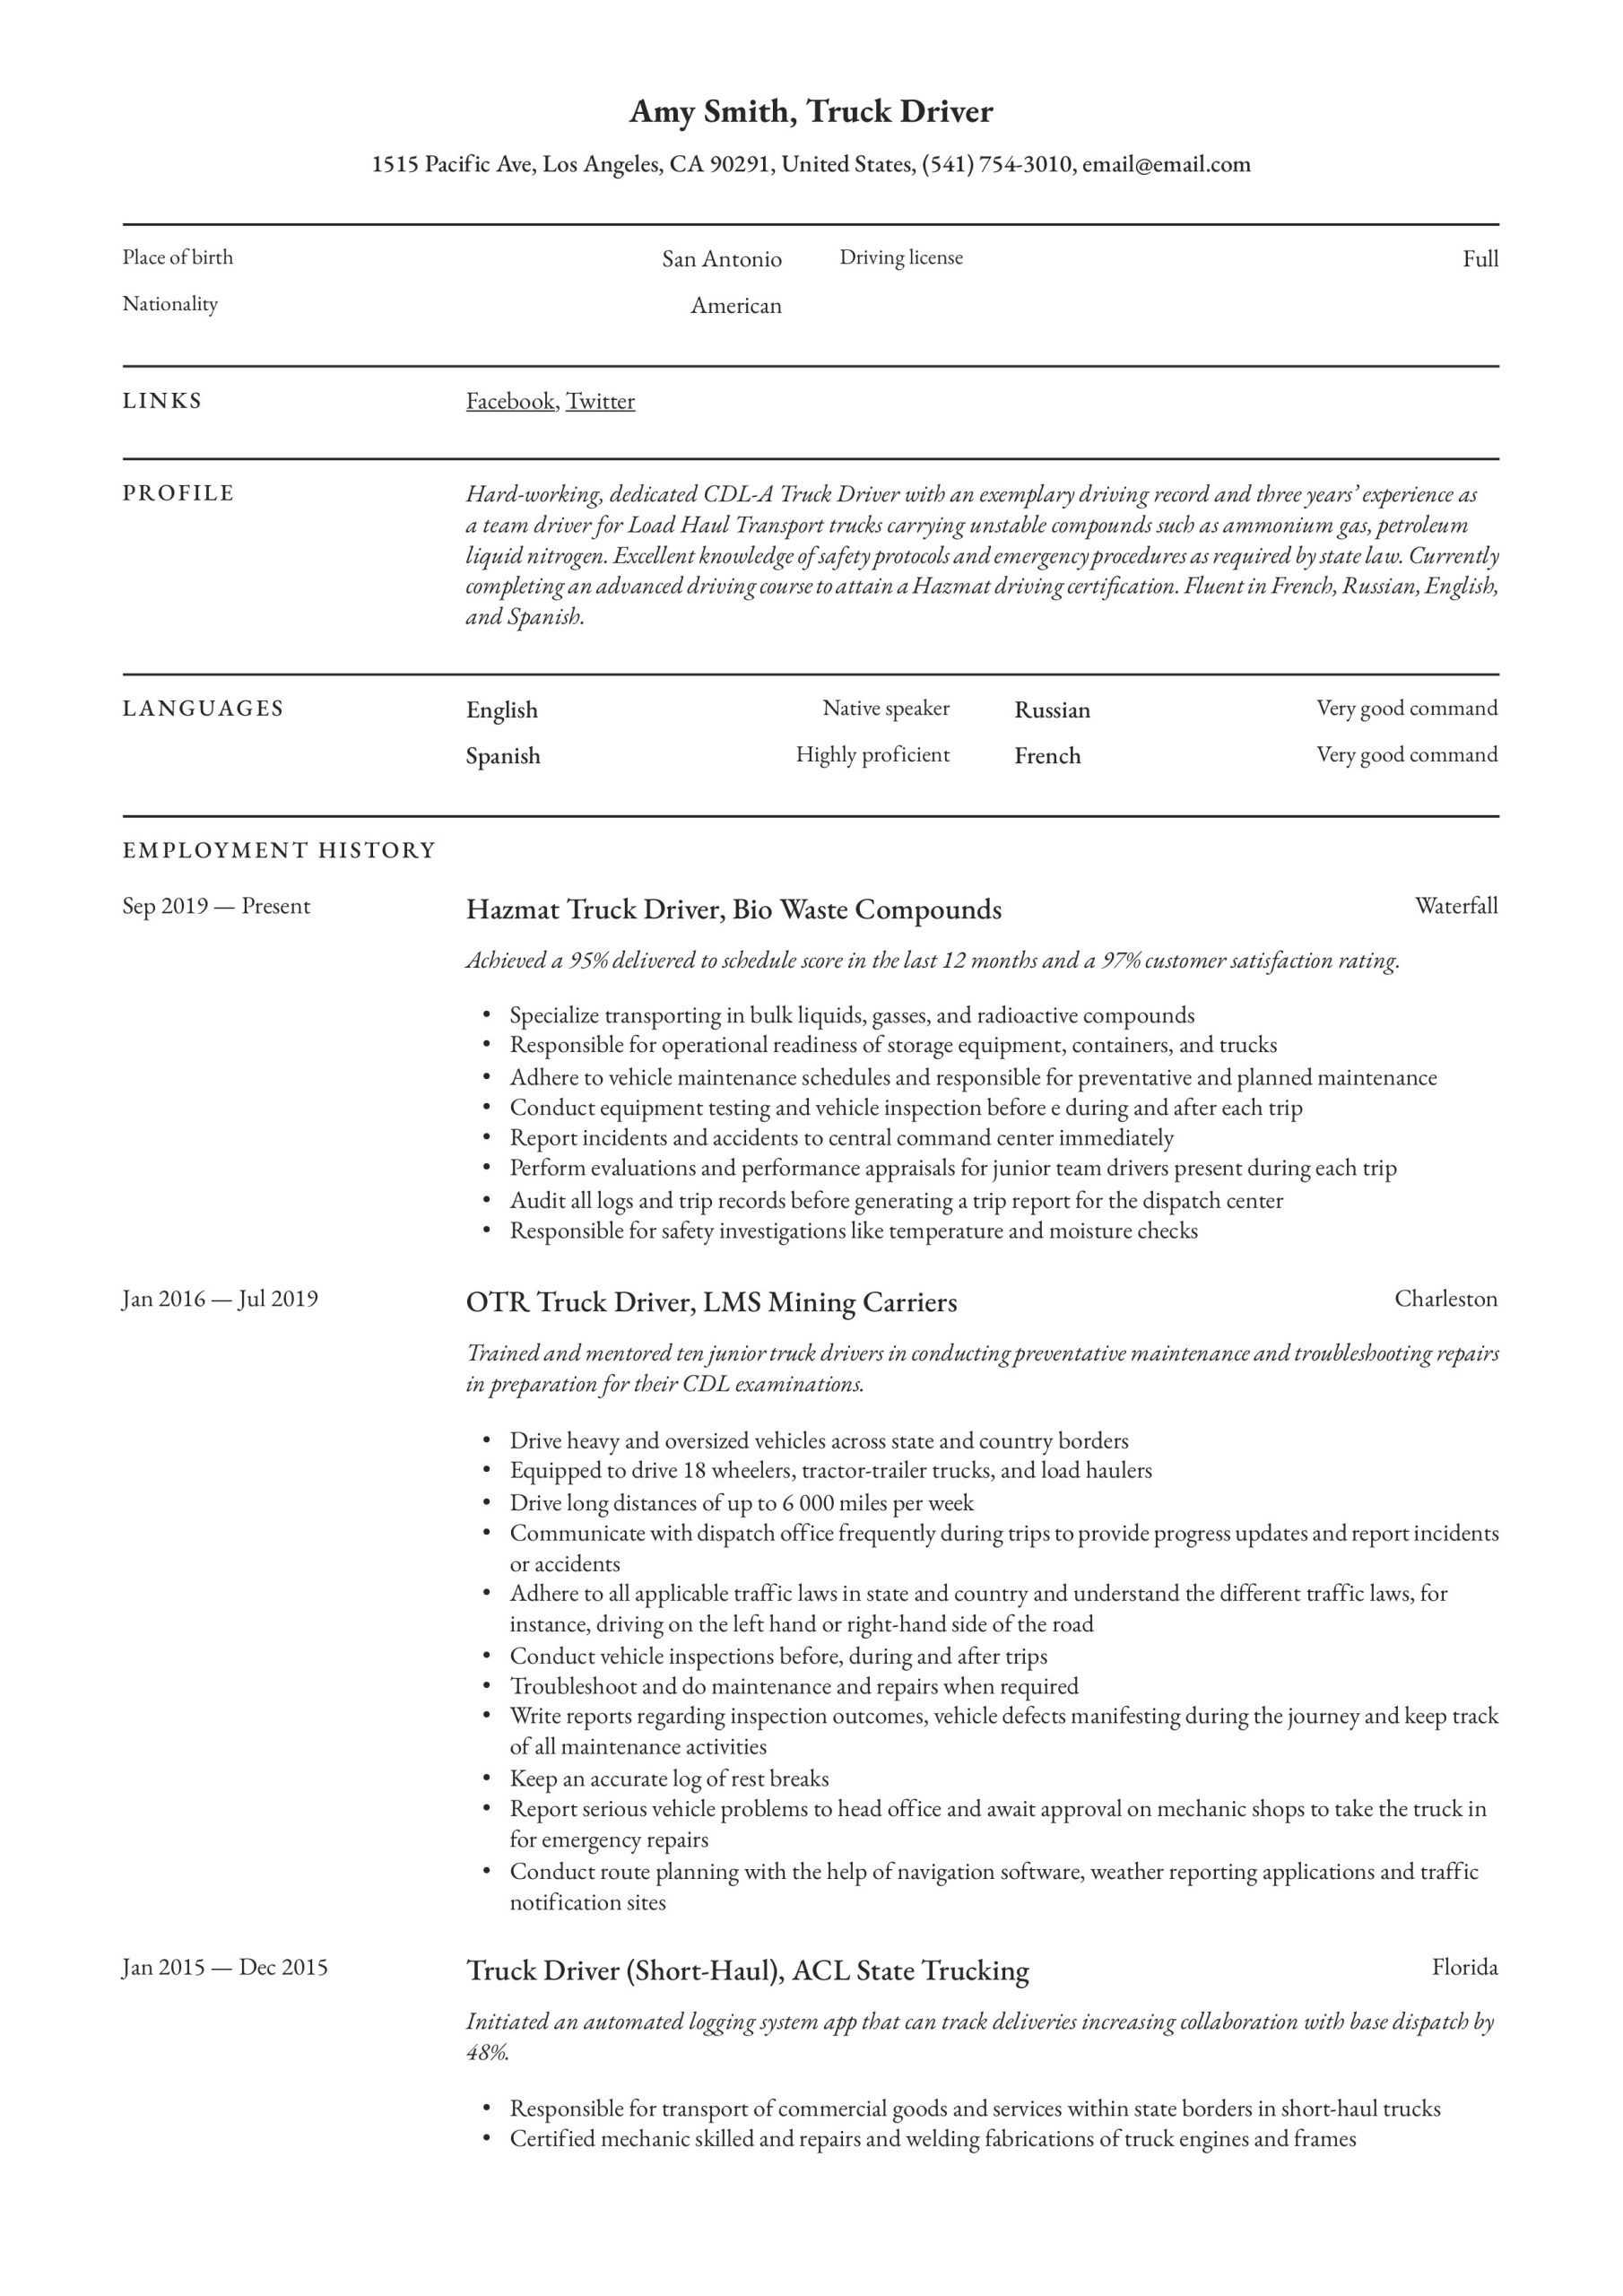 Sample Resume for Truck Driving Job Truck Driver Resume & Writing Guide  12 Resume Examples 2019